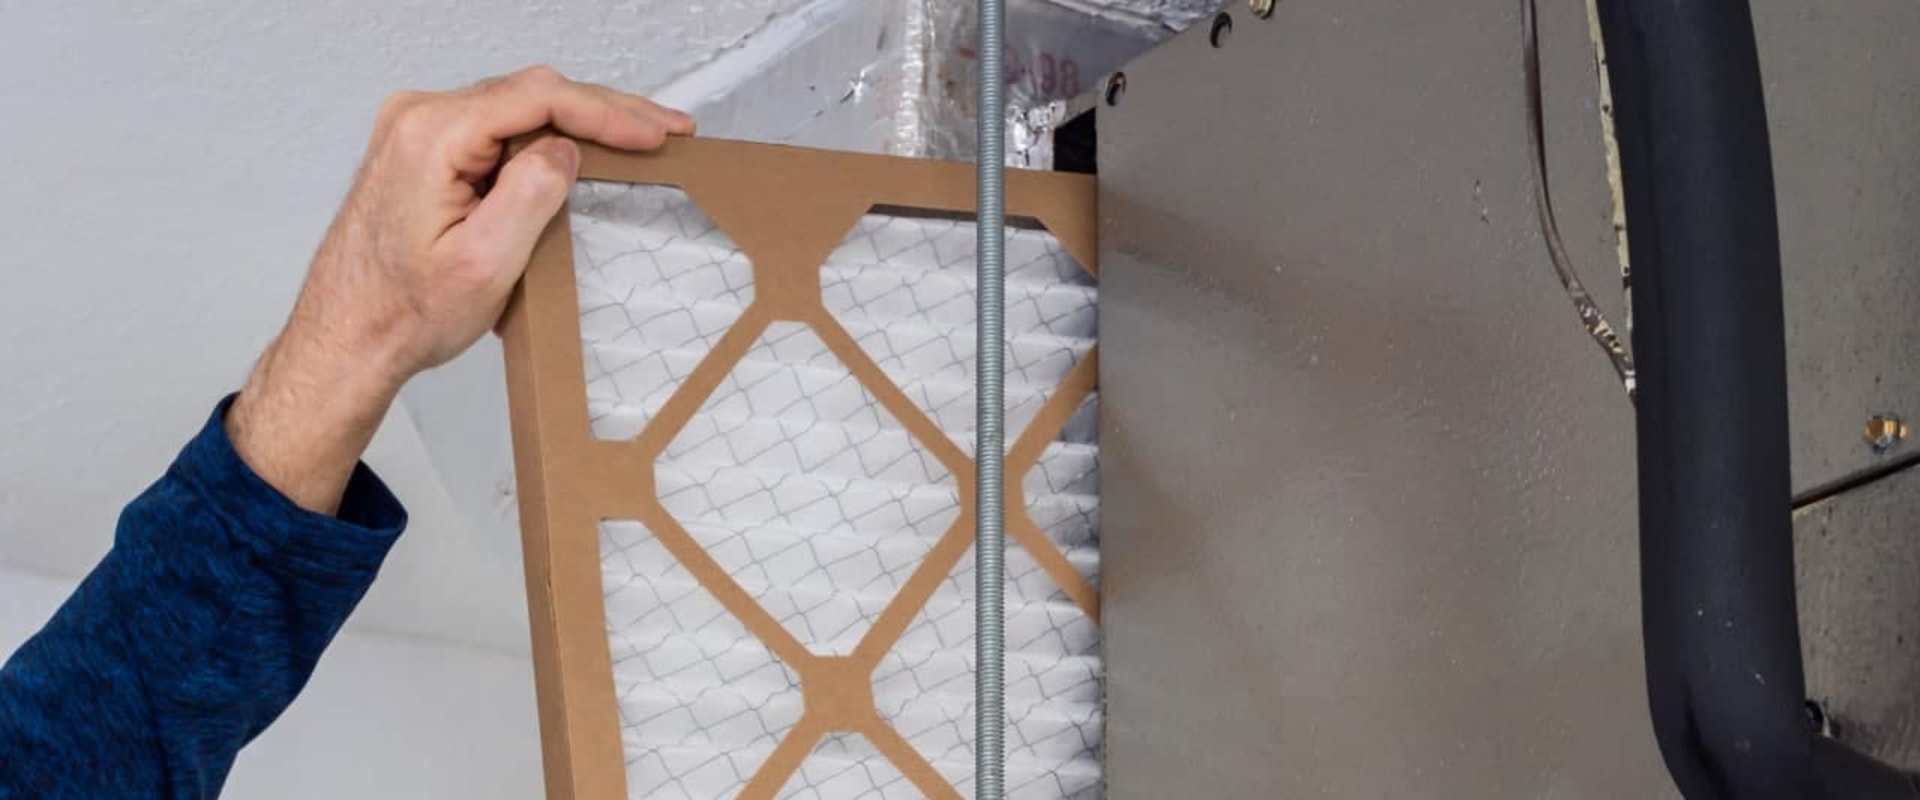 Maintaining Your 16x25x1 Air Filter for Optimal Performance